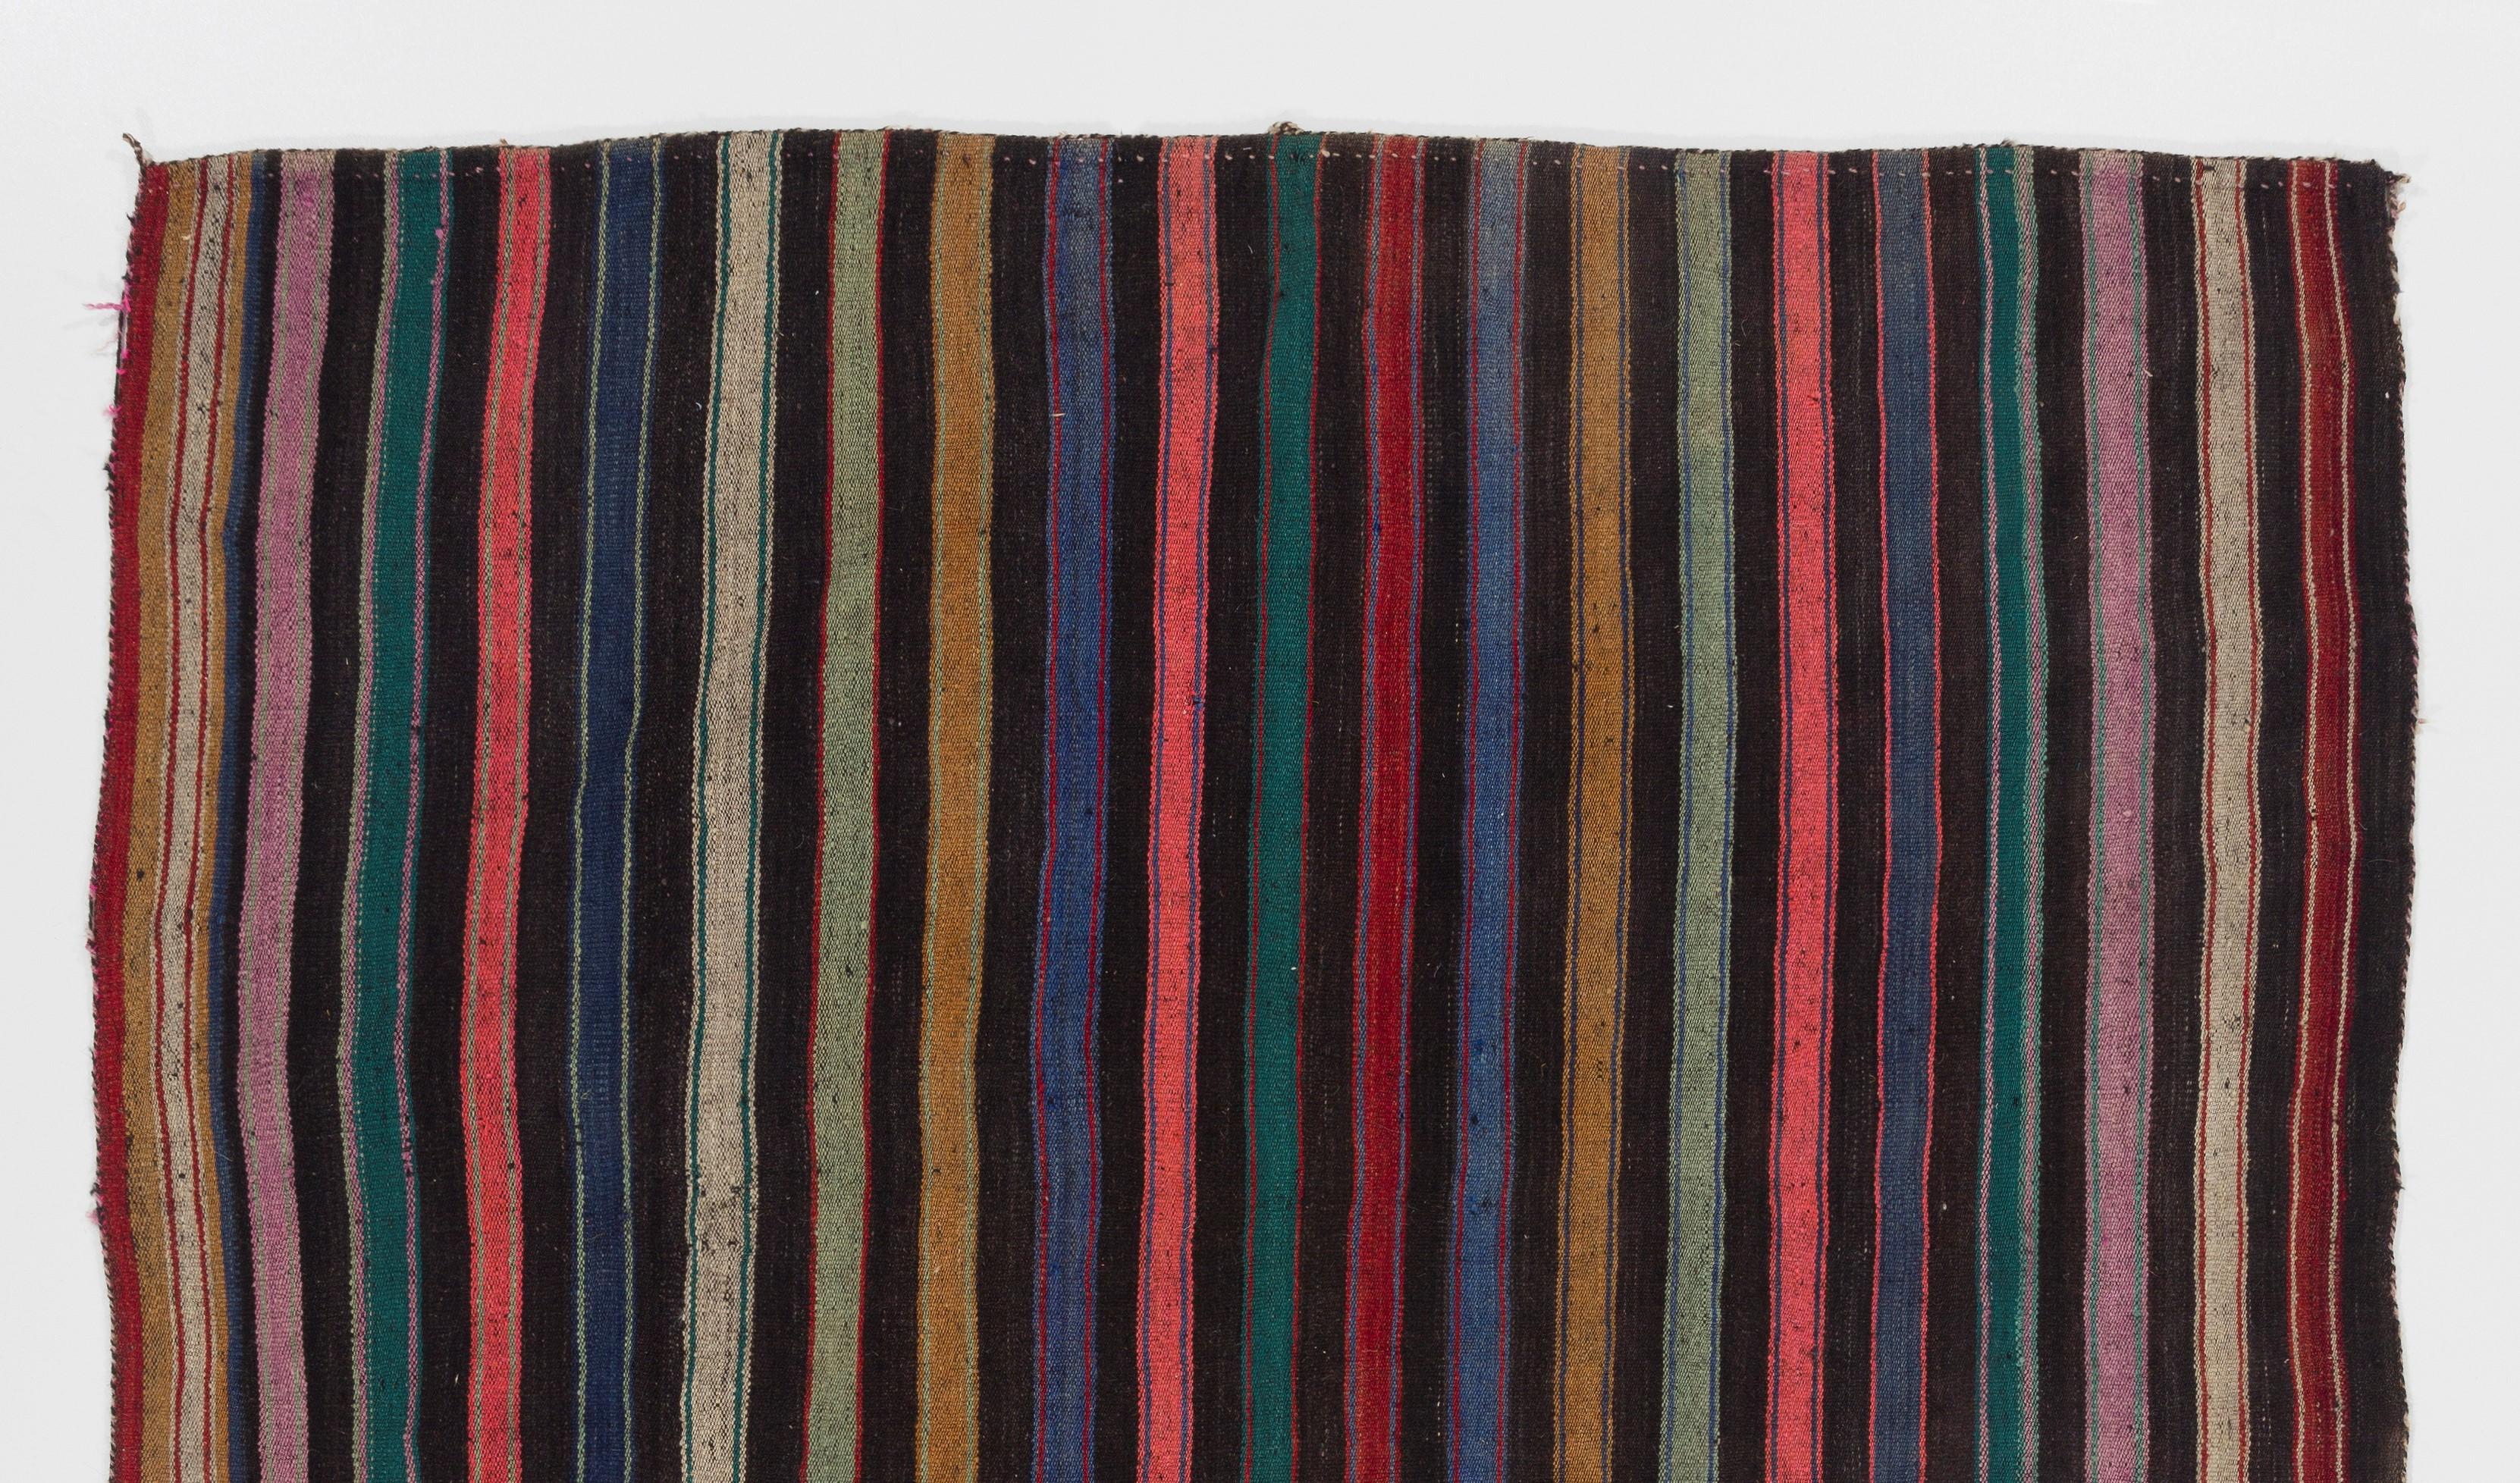 A simple wool rug with a minimalist aesthetic handwoven by the Nomadic tribes in South Central Turkey in the 1960s featuring a design of colorful stripes. Made entirely of wool, in very good condition, sturdy and professionally cleaned.

Size: